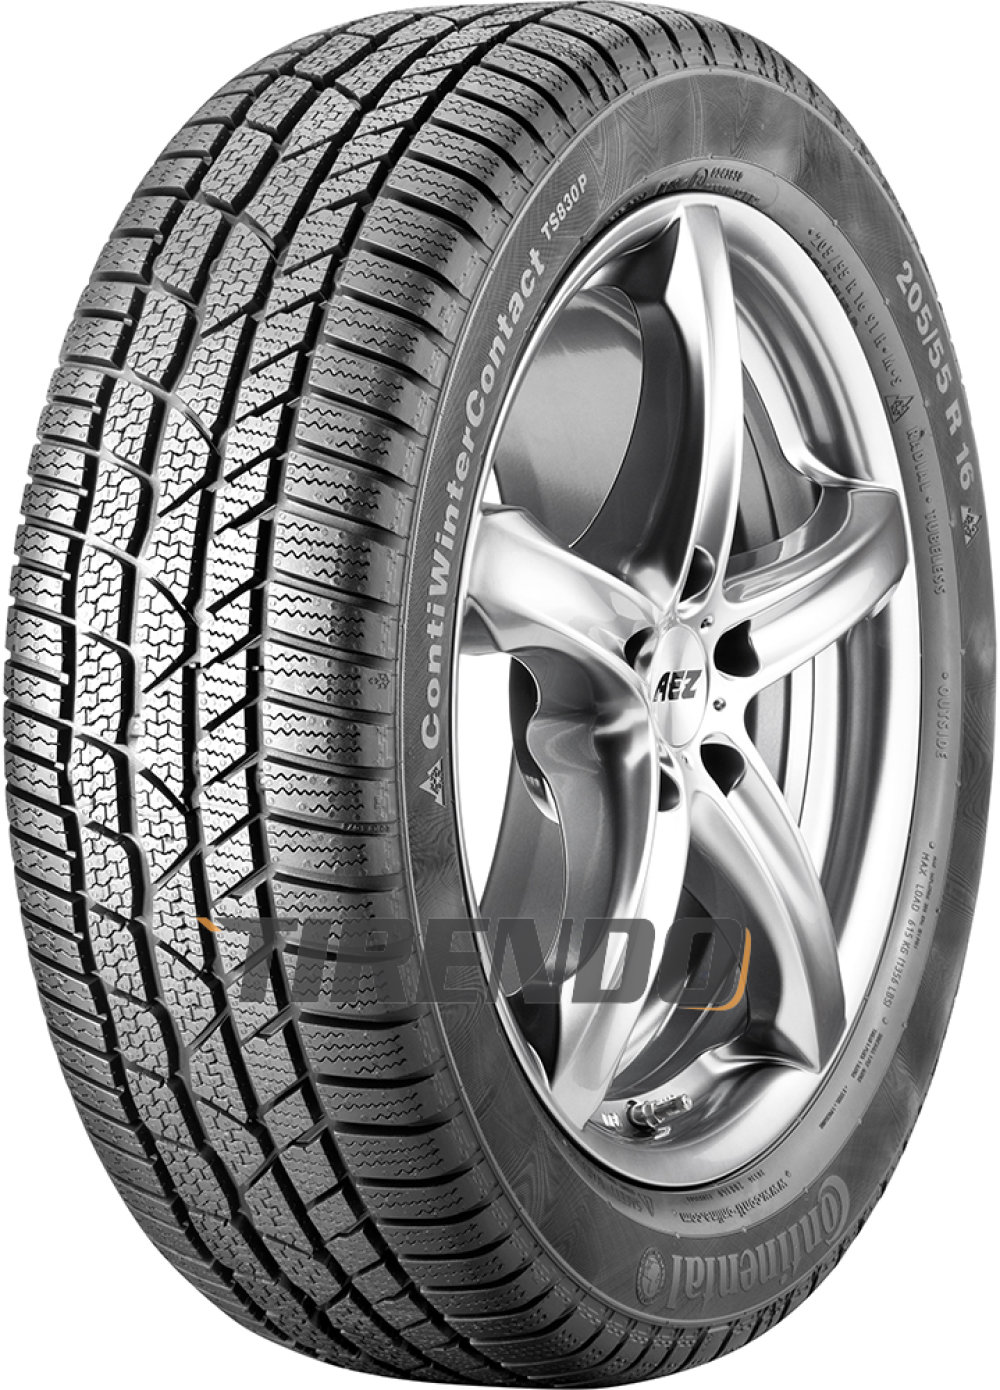 Image of Continental ContiWinterContact TS 830P ( 205/50 R17 93H XL Conti Seal )